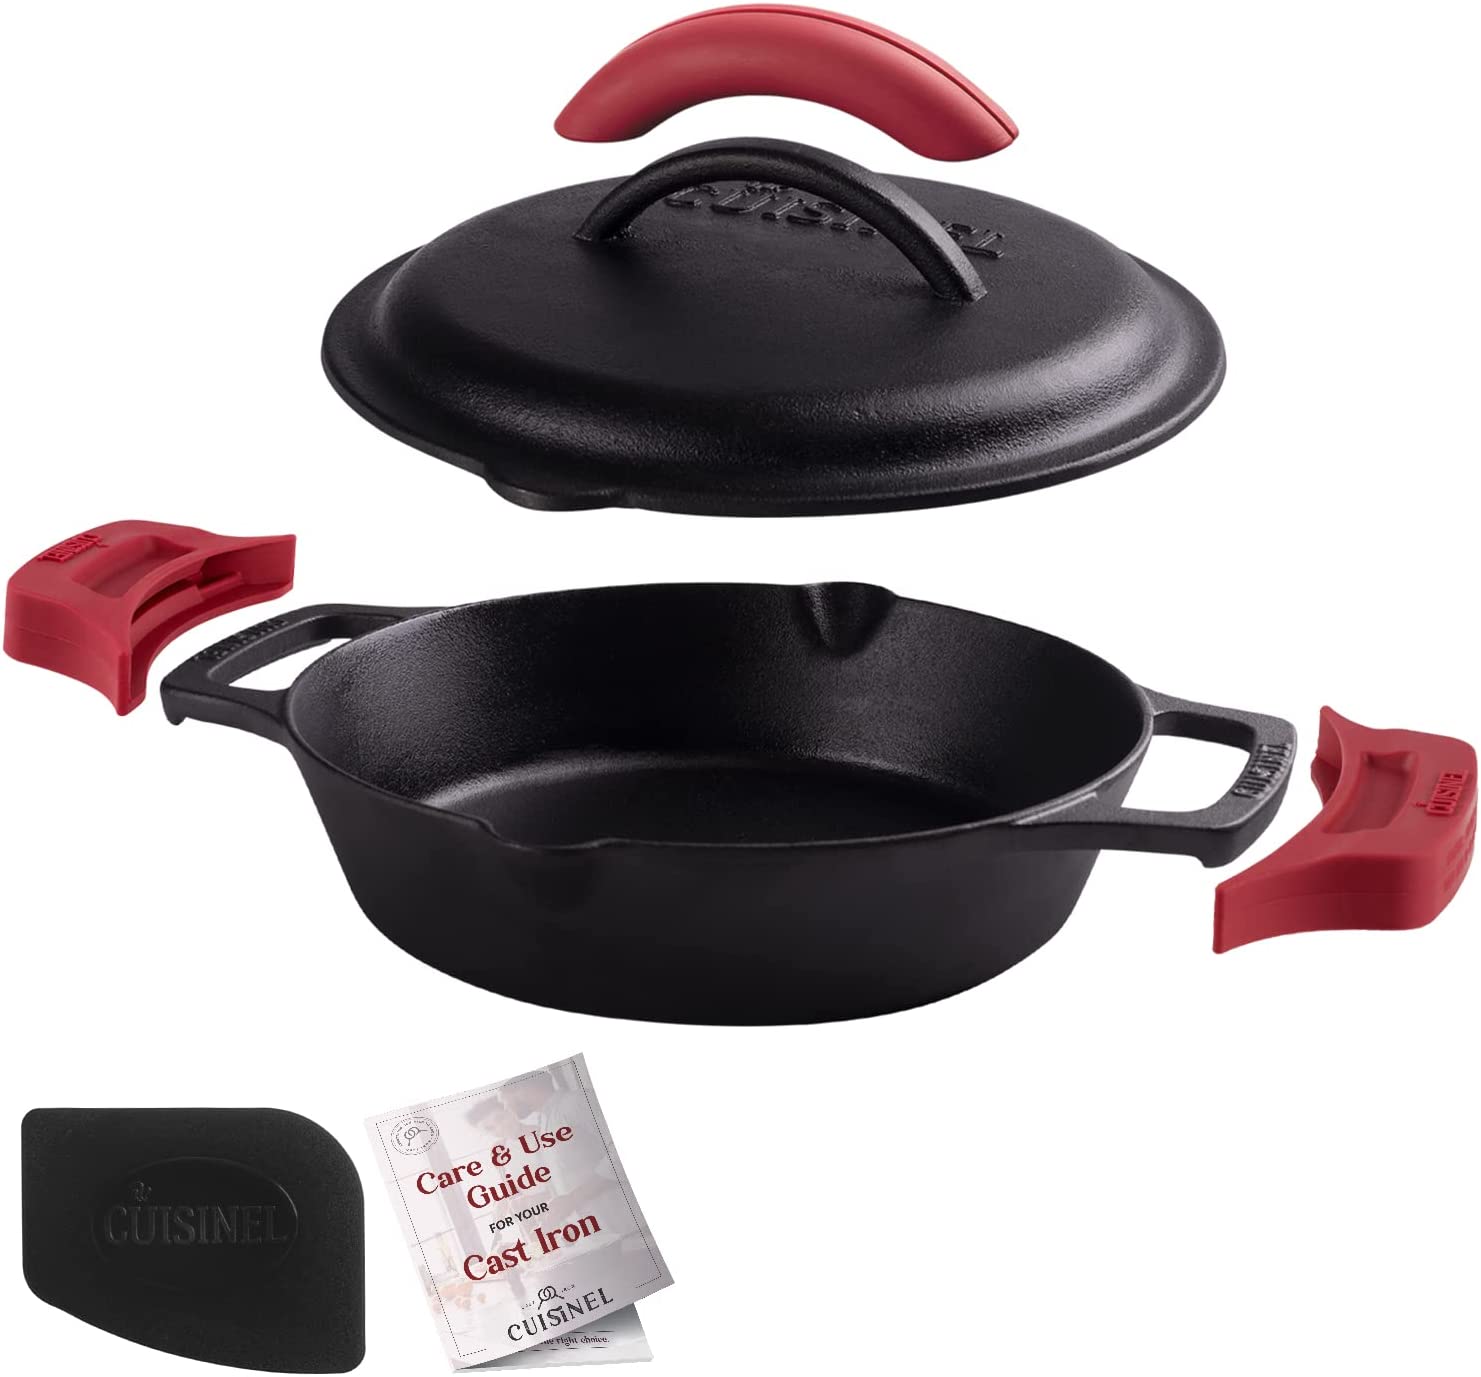 Cast Iron Skillet with Cast Iron Lid - 8